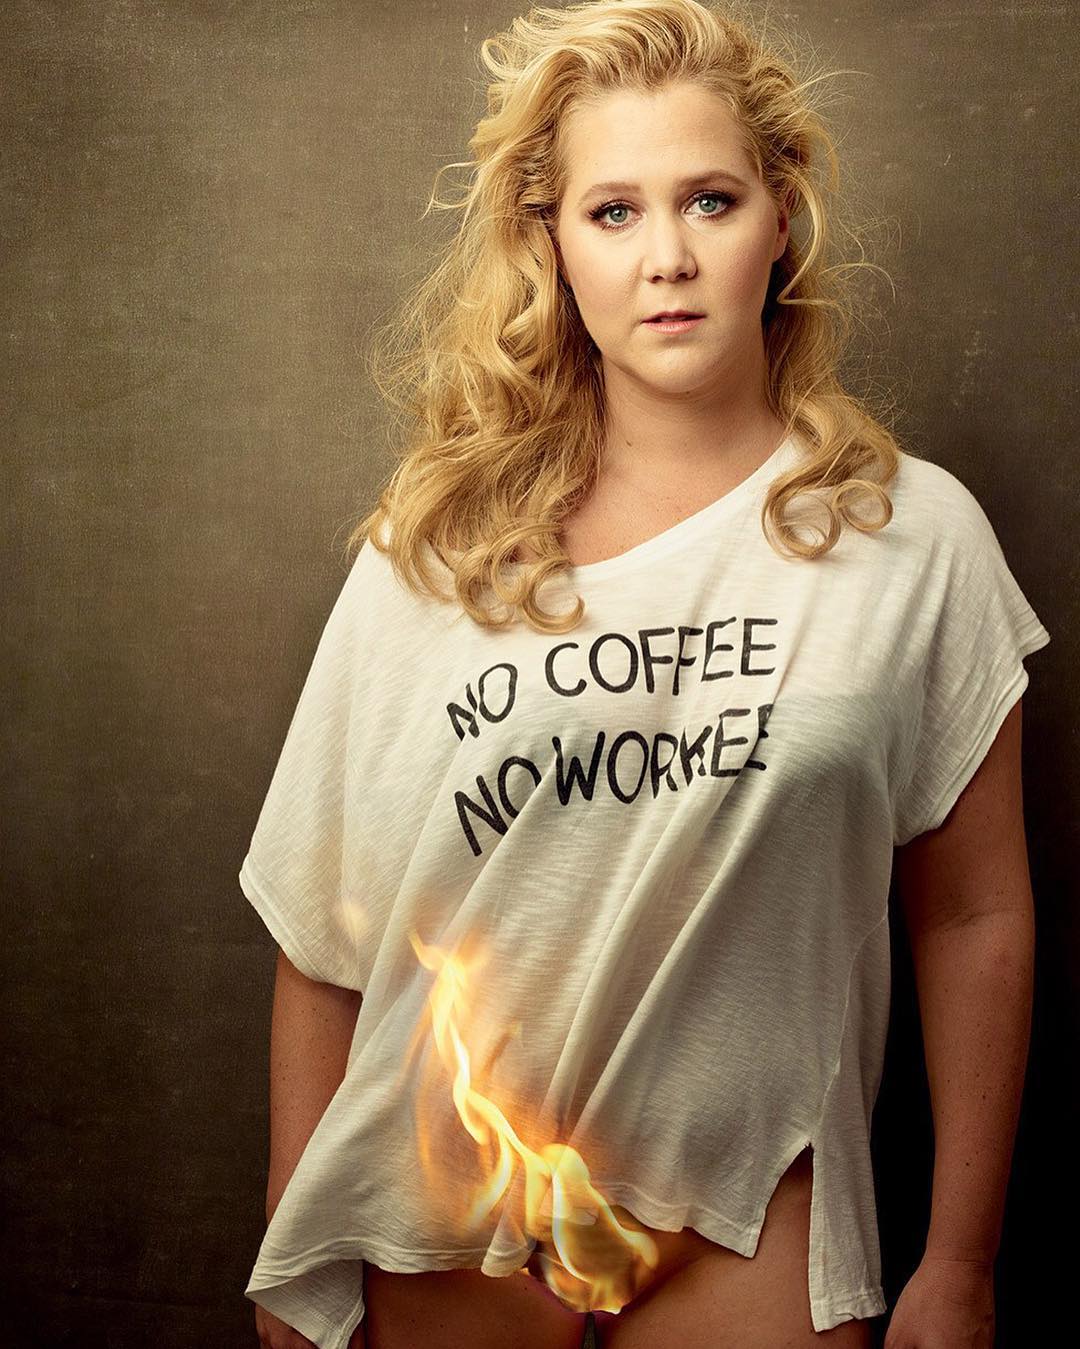 Amy Schumer Nude: All of Her Most Naked Moments | WHO Magazine